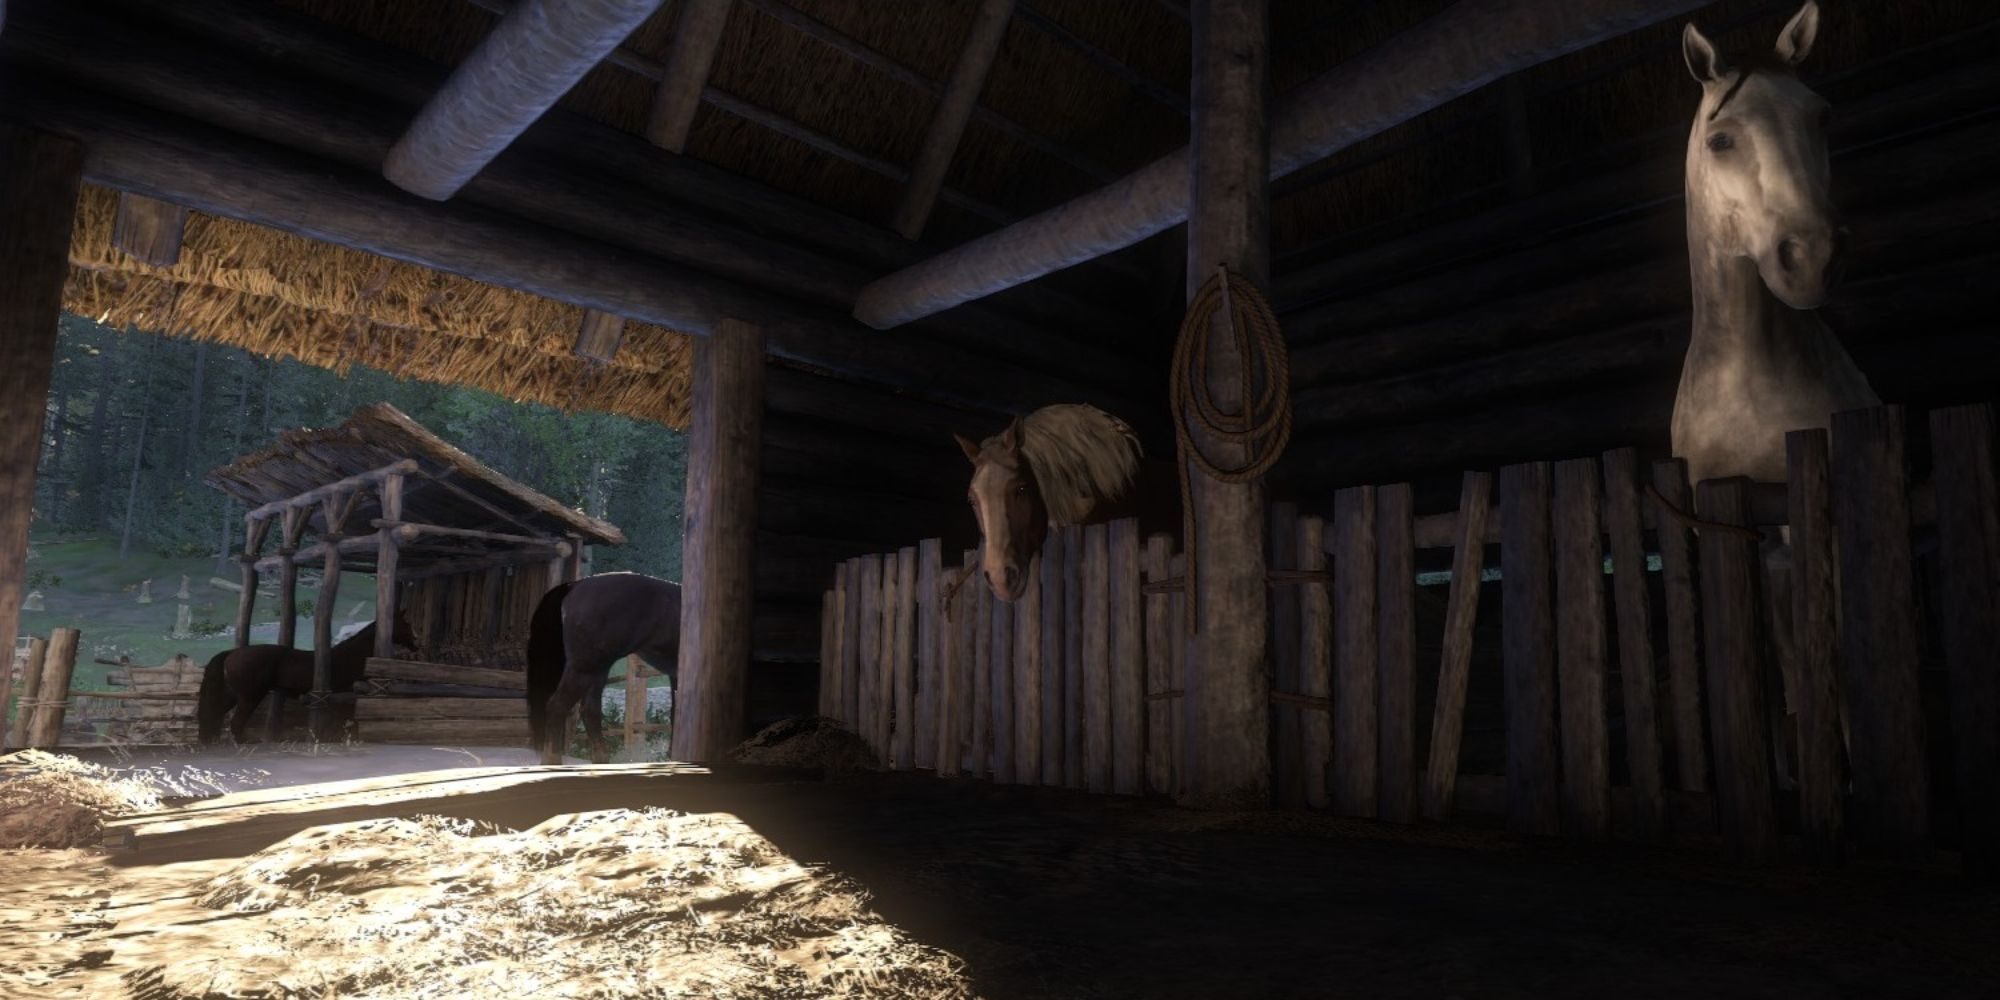 gingharian_come_deliverance_stables_with_many_horses-2615813